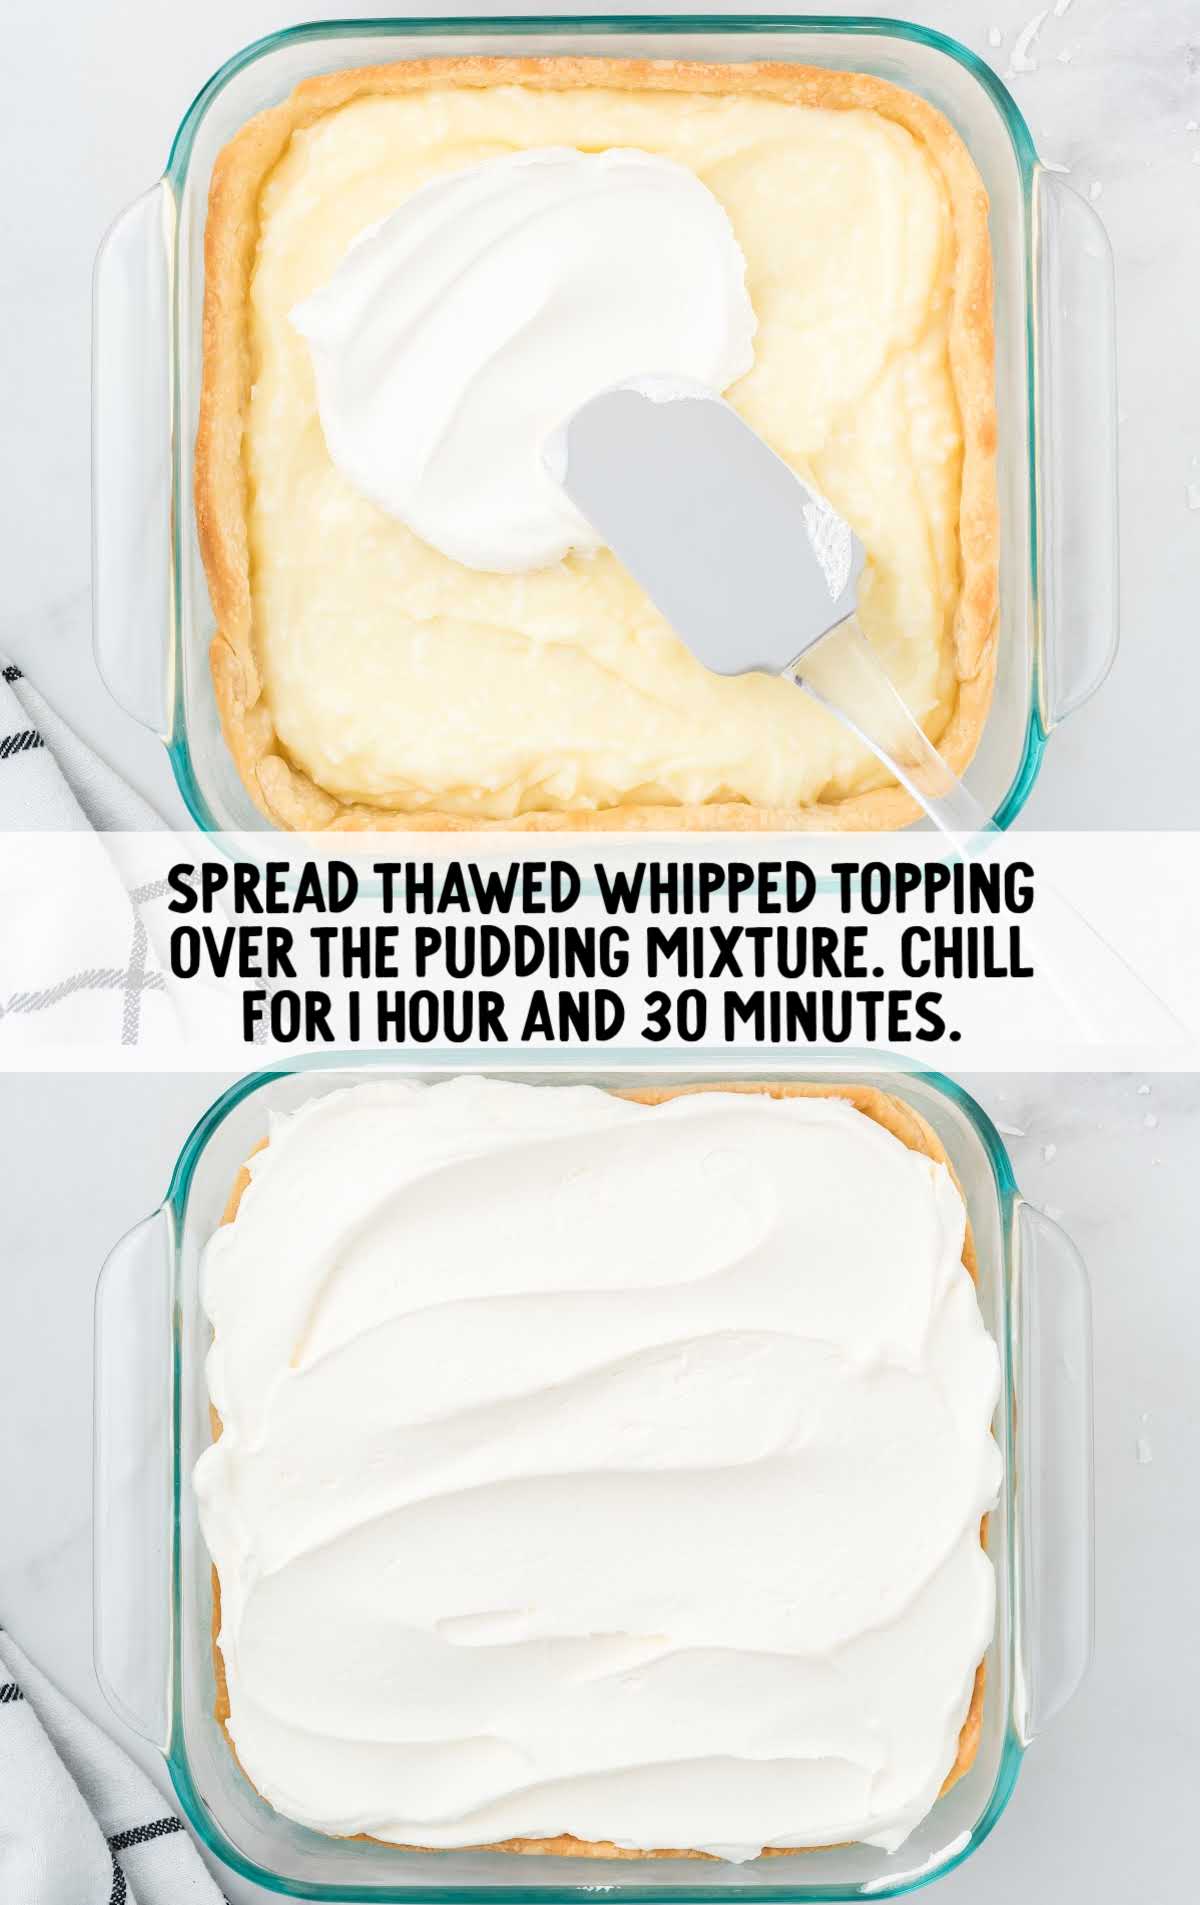 thawed whipped topping spread over the pudding mixture in a baking dish